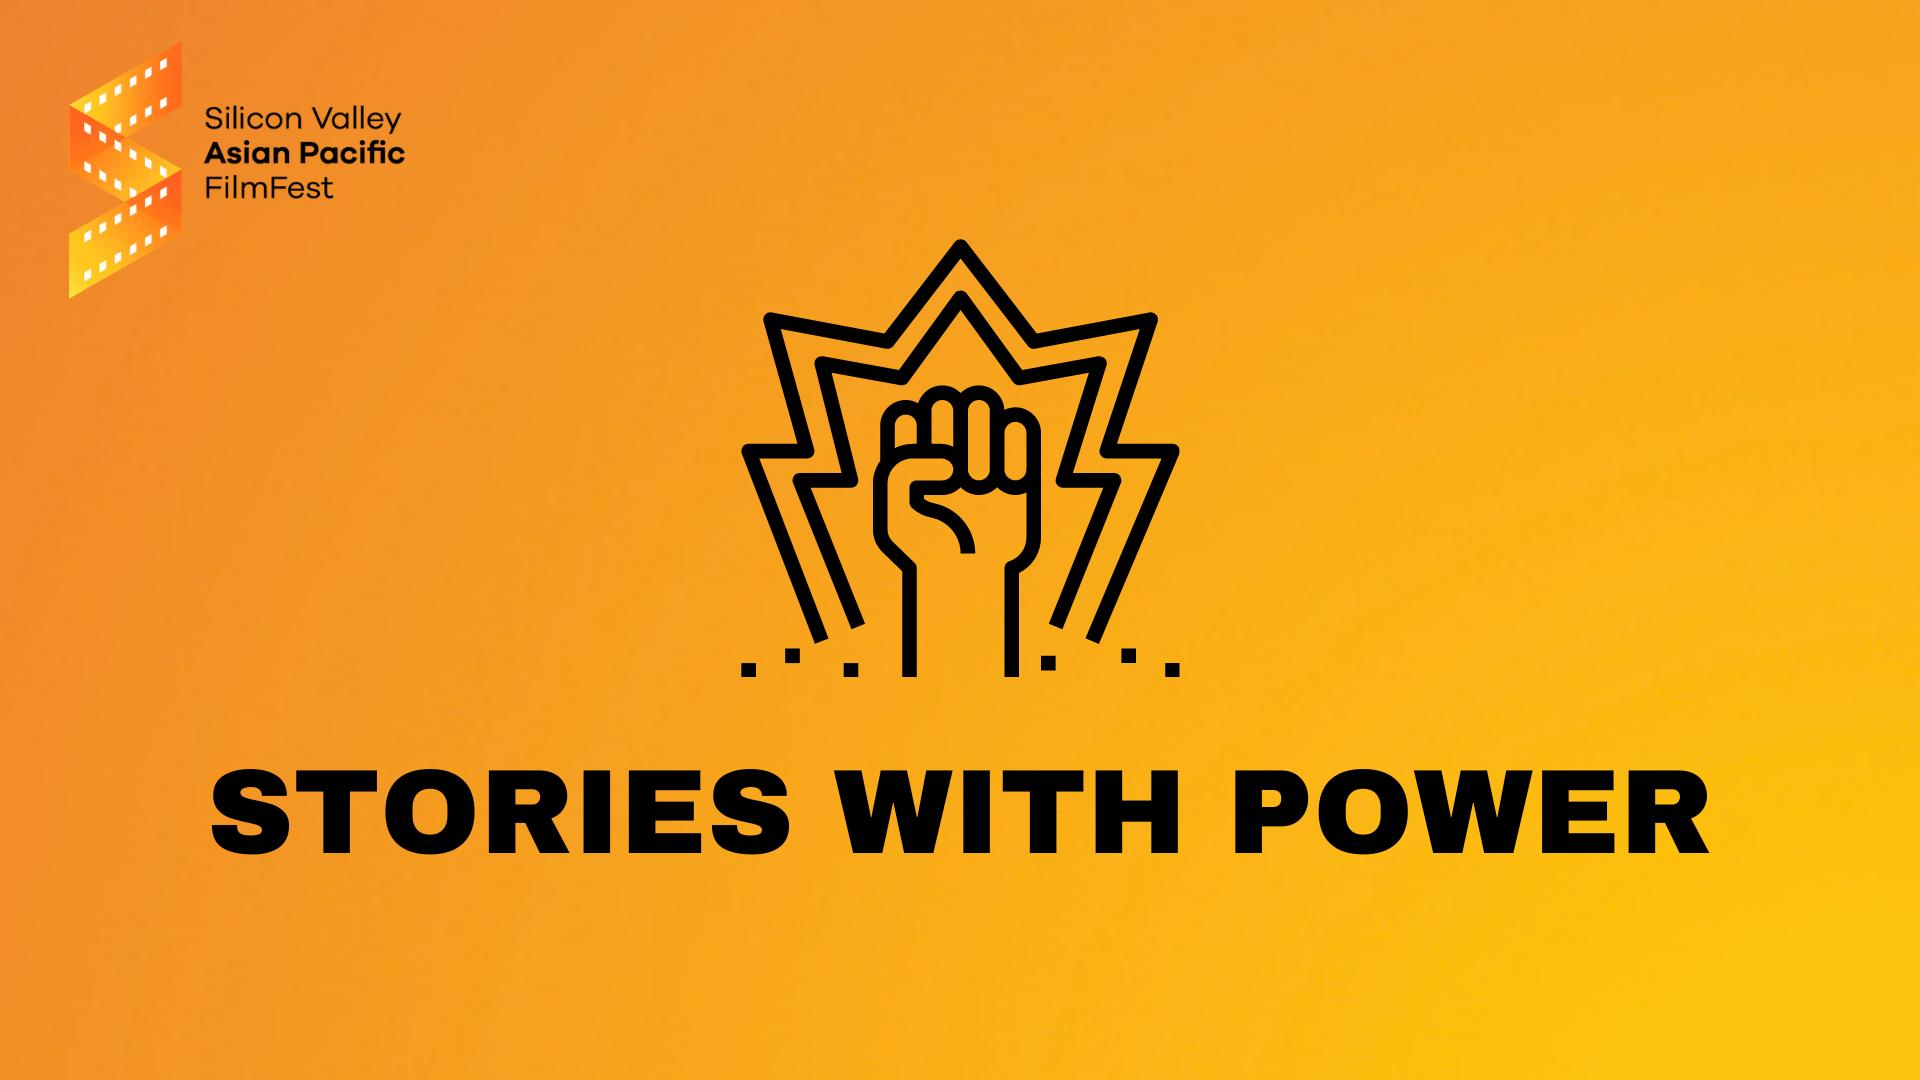 Panel A - Stories with Power